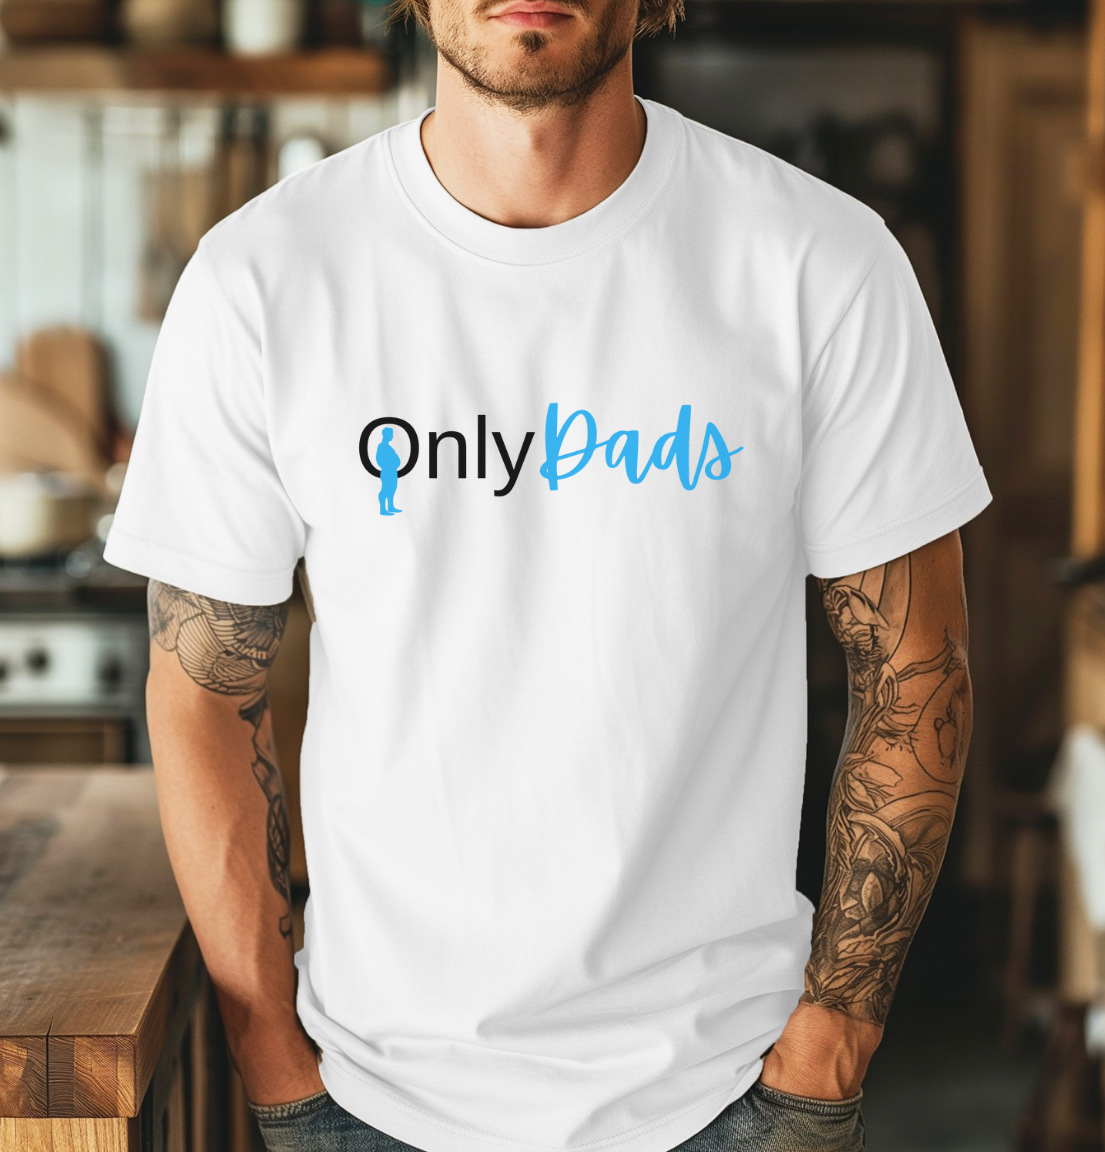 Only Dads Tee